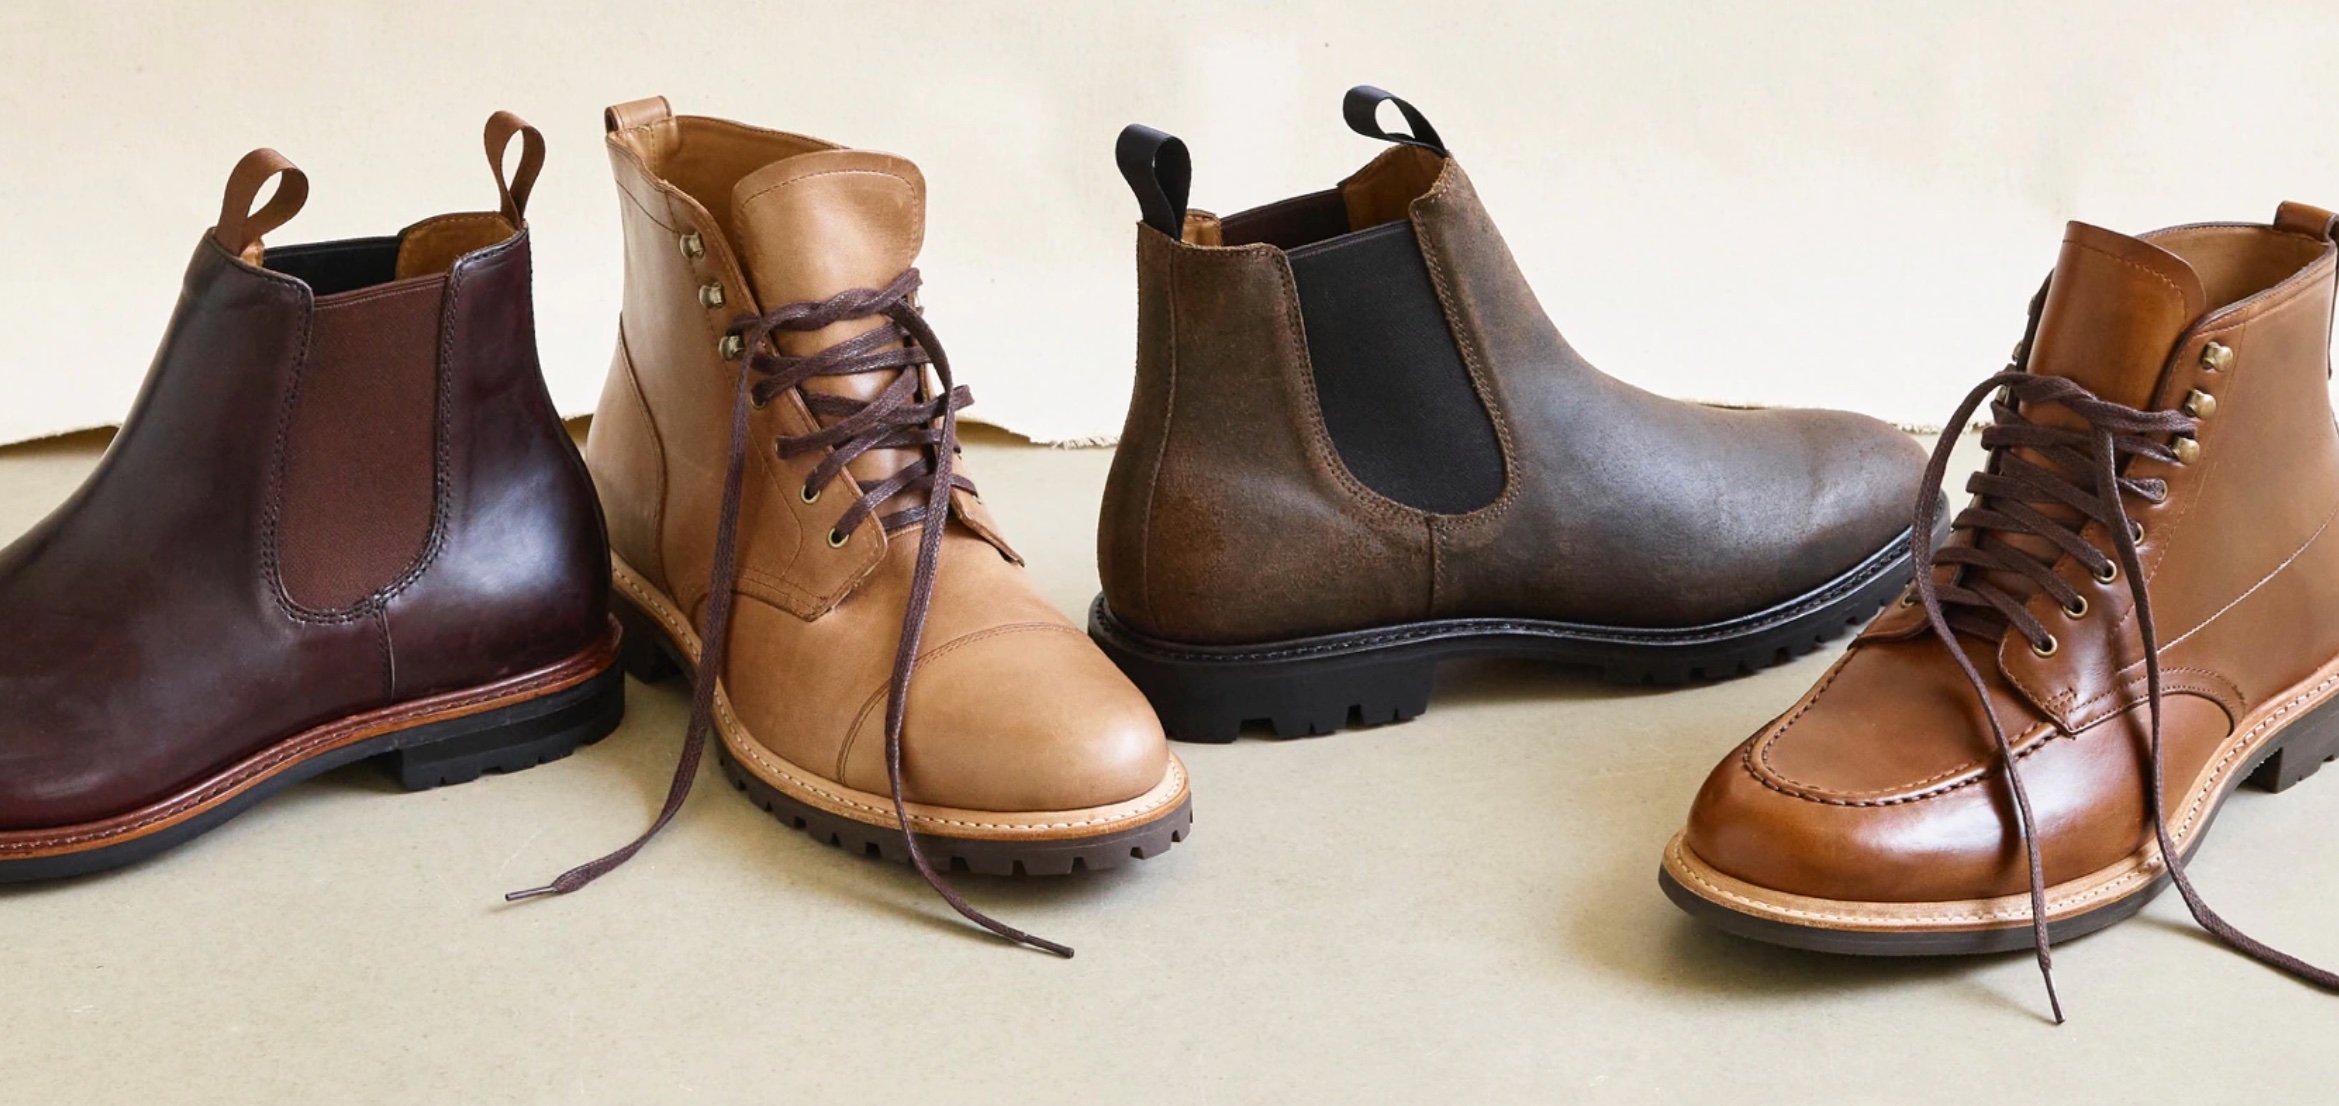 J Crew Fall Re Boot Collection Drops An Array Of Stylish Footwear 9to5toys